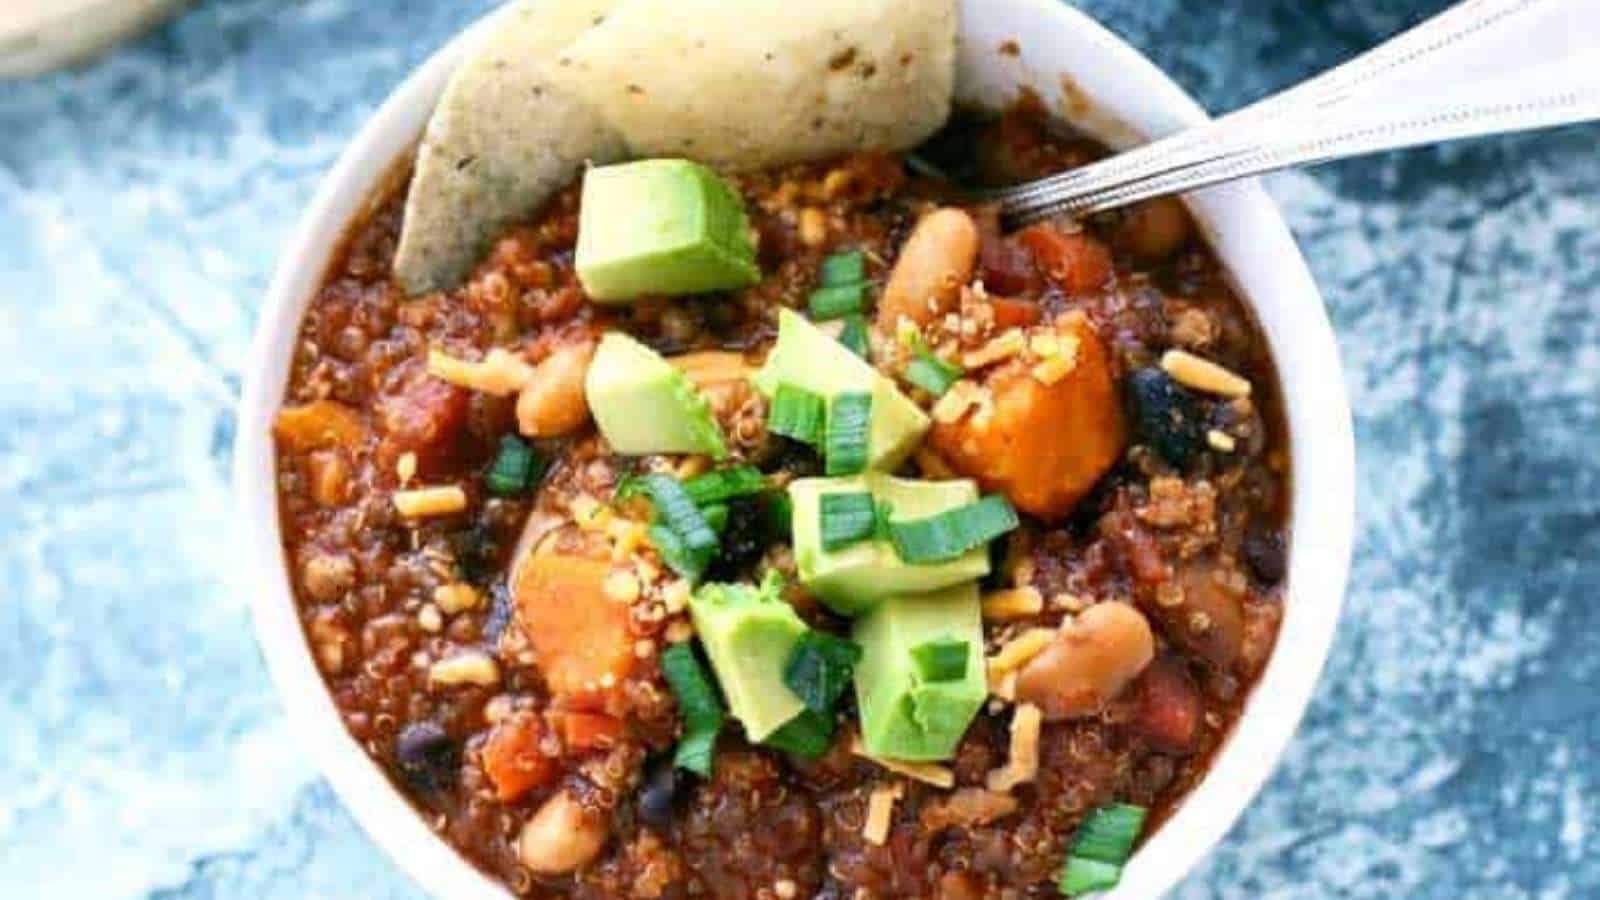 Chili in a bowl with avocado and tortilla chips.